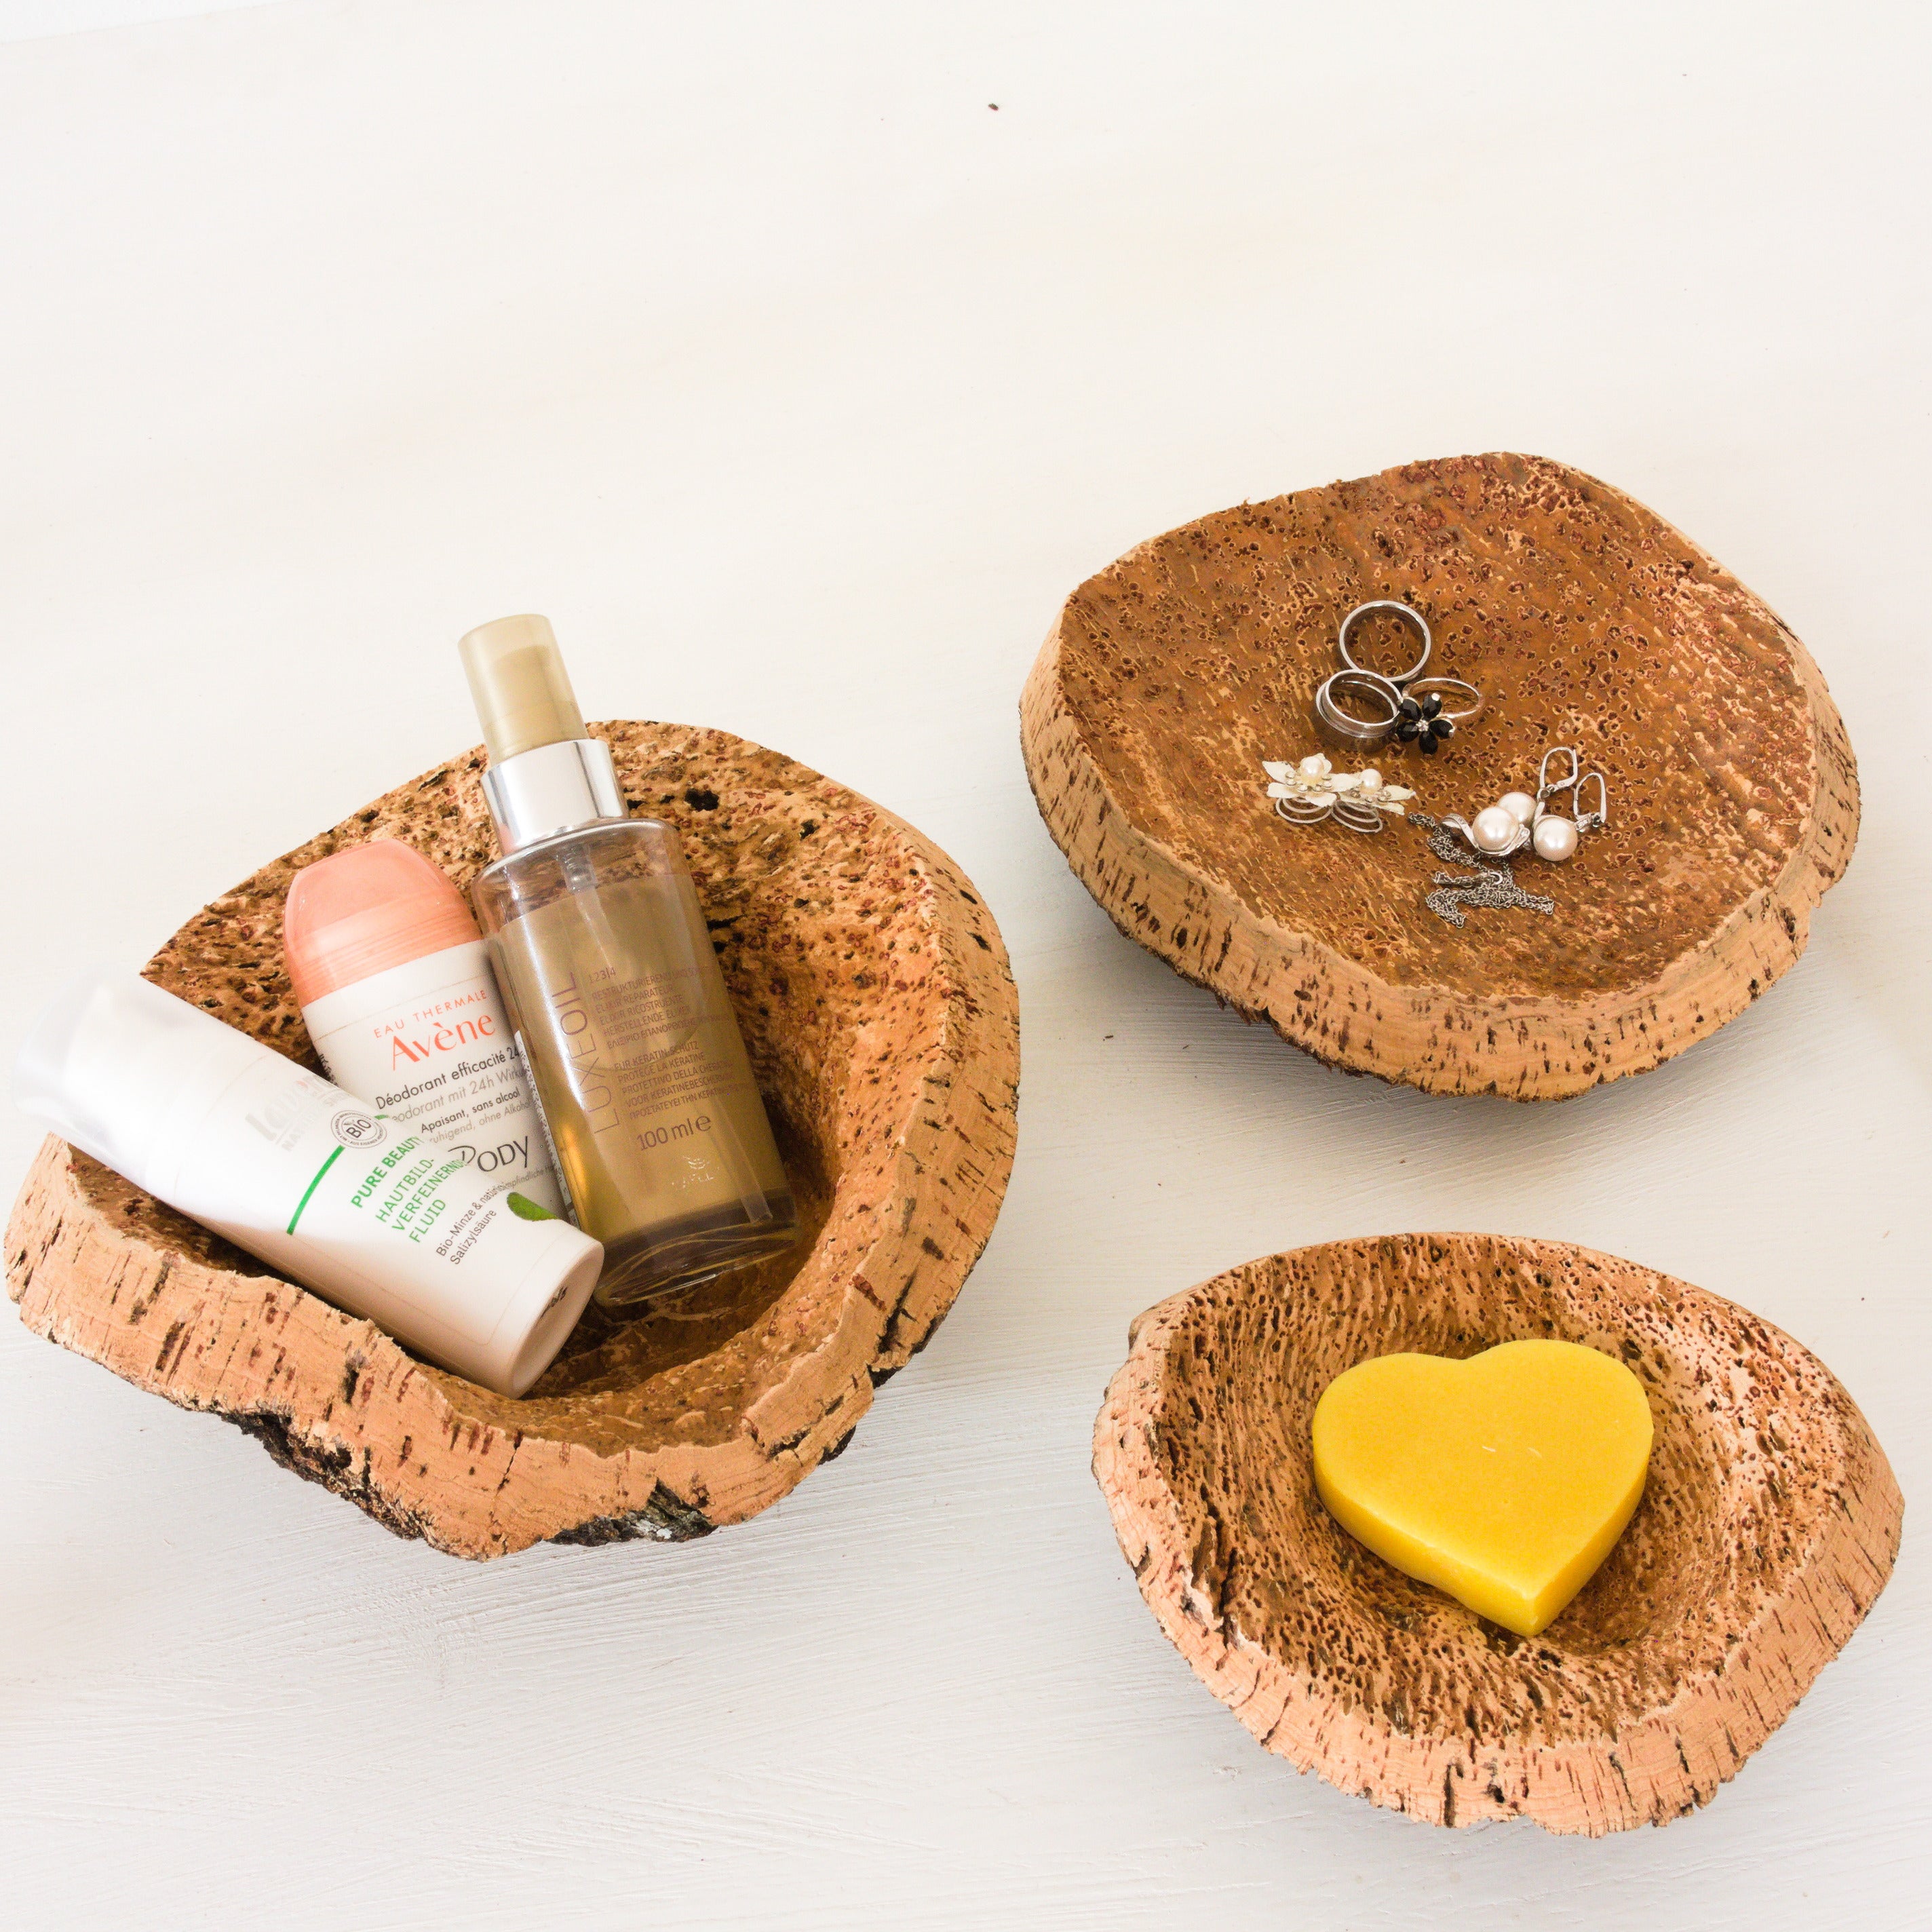 TOP gift idea * VERKORKst premium cork bowl * SPECIAL OFFER from EUR 25.00 * unique * fireproof, water-repellent, handmade, sustainable